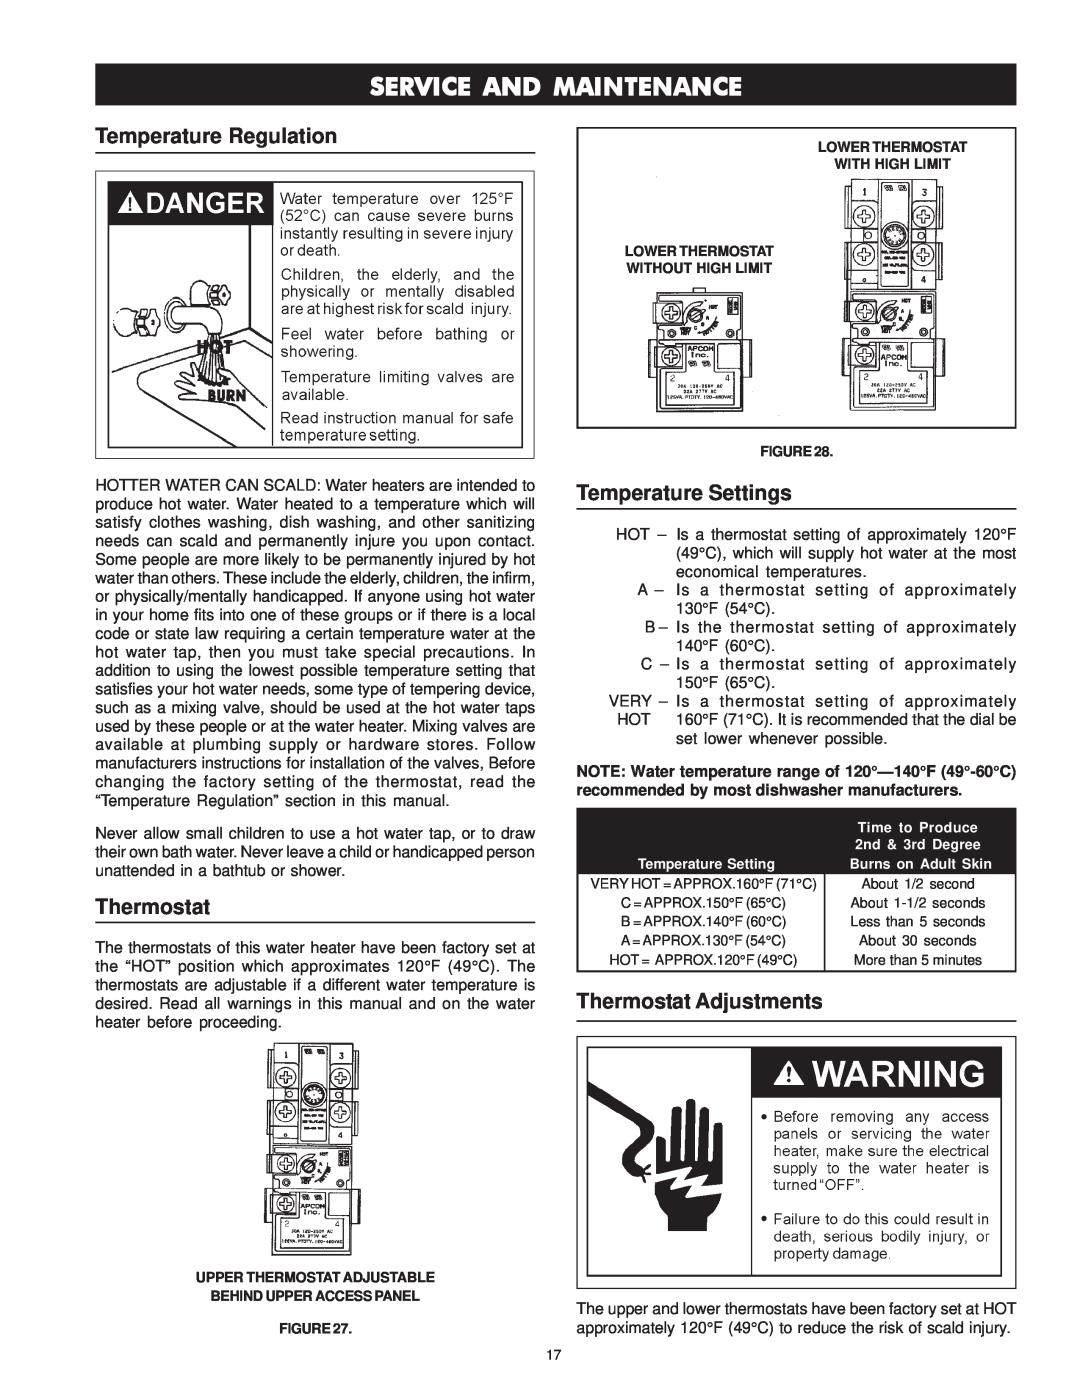 Maytag HRE41282T manual Service And Maintenance, Temperature Regulation, Temperature Settings, Thermostat Adjustments 